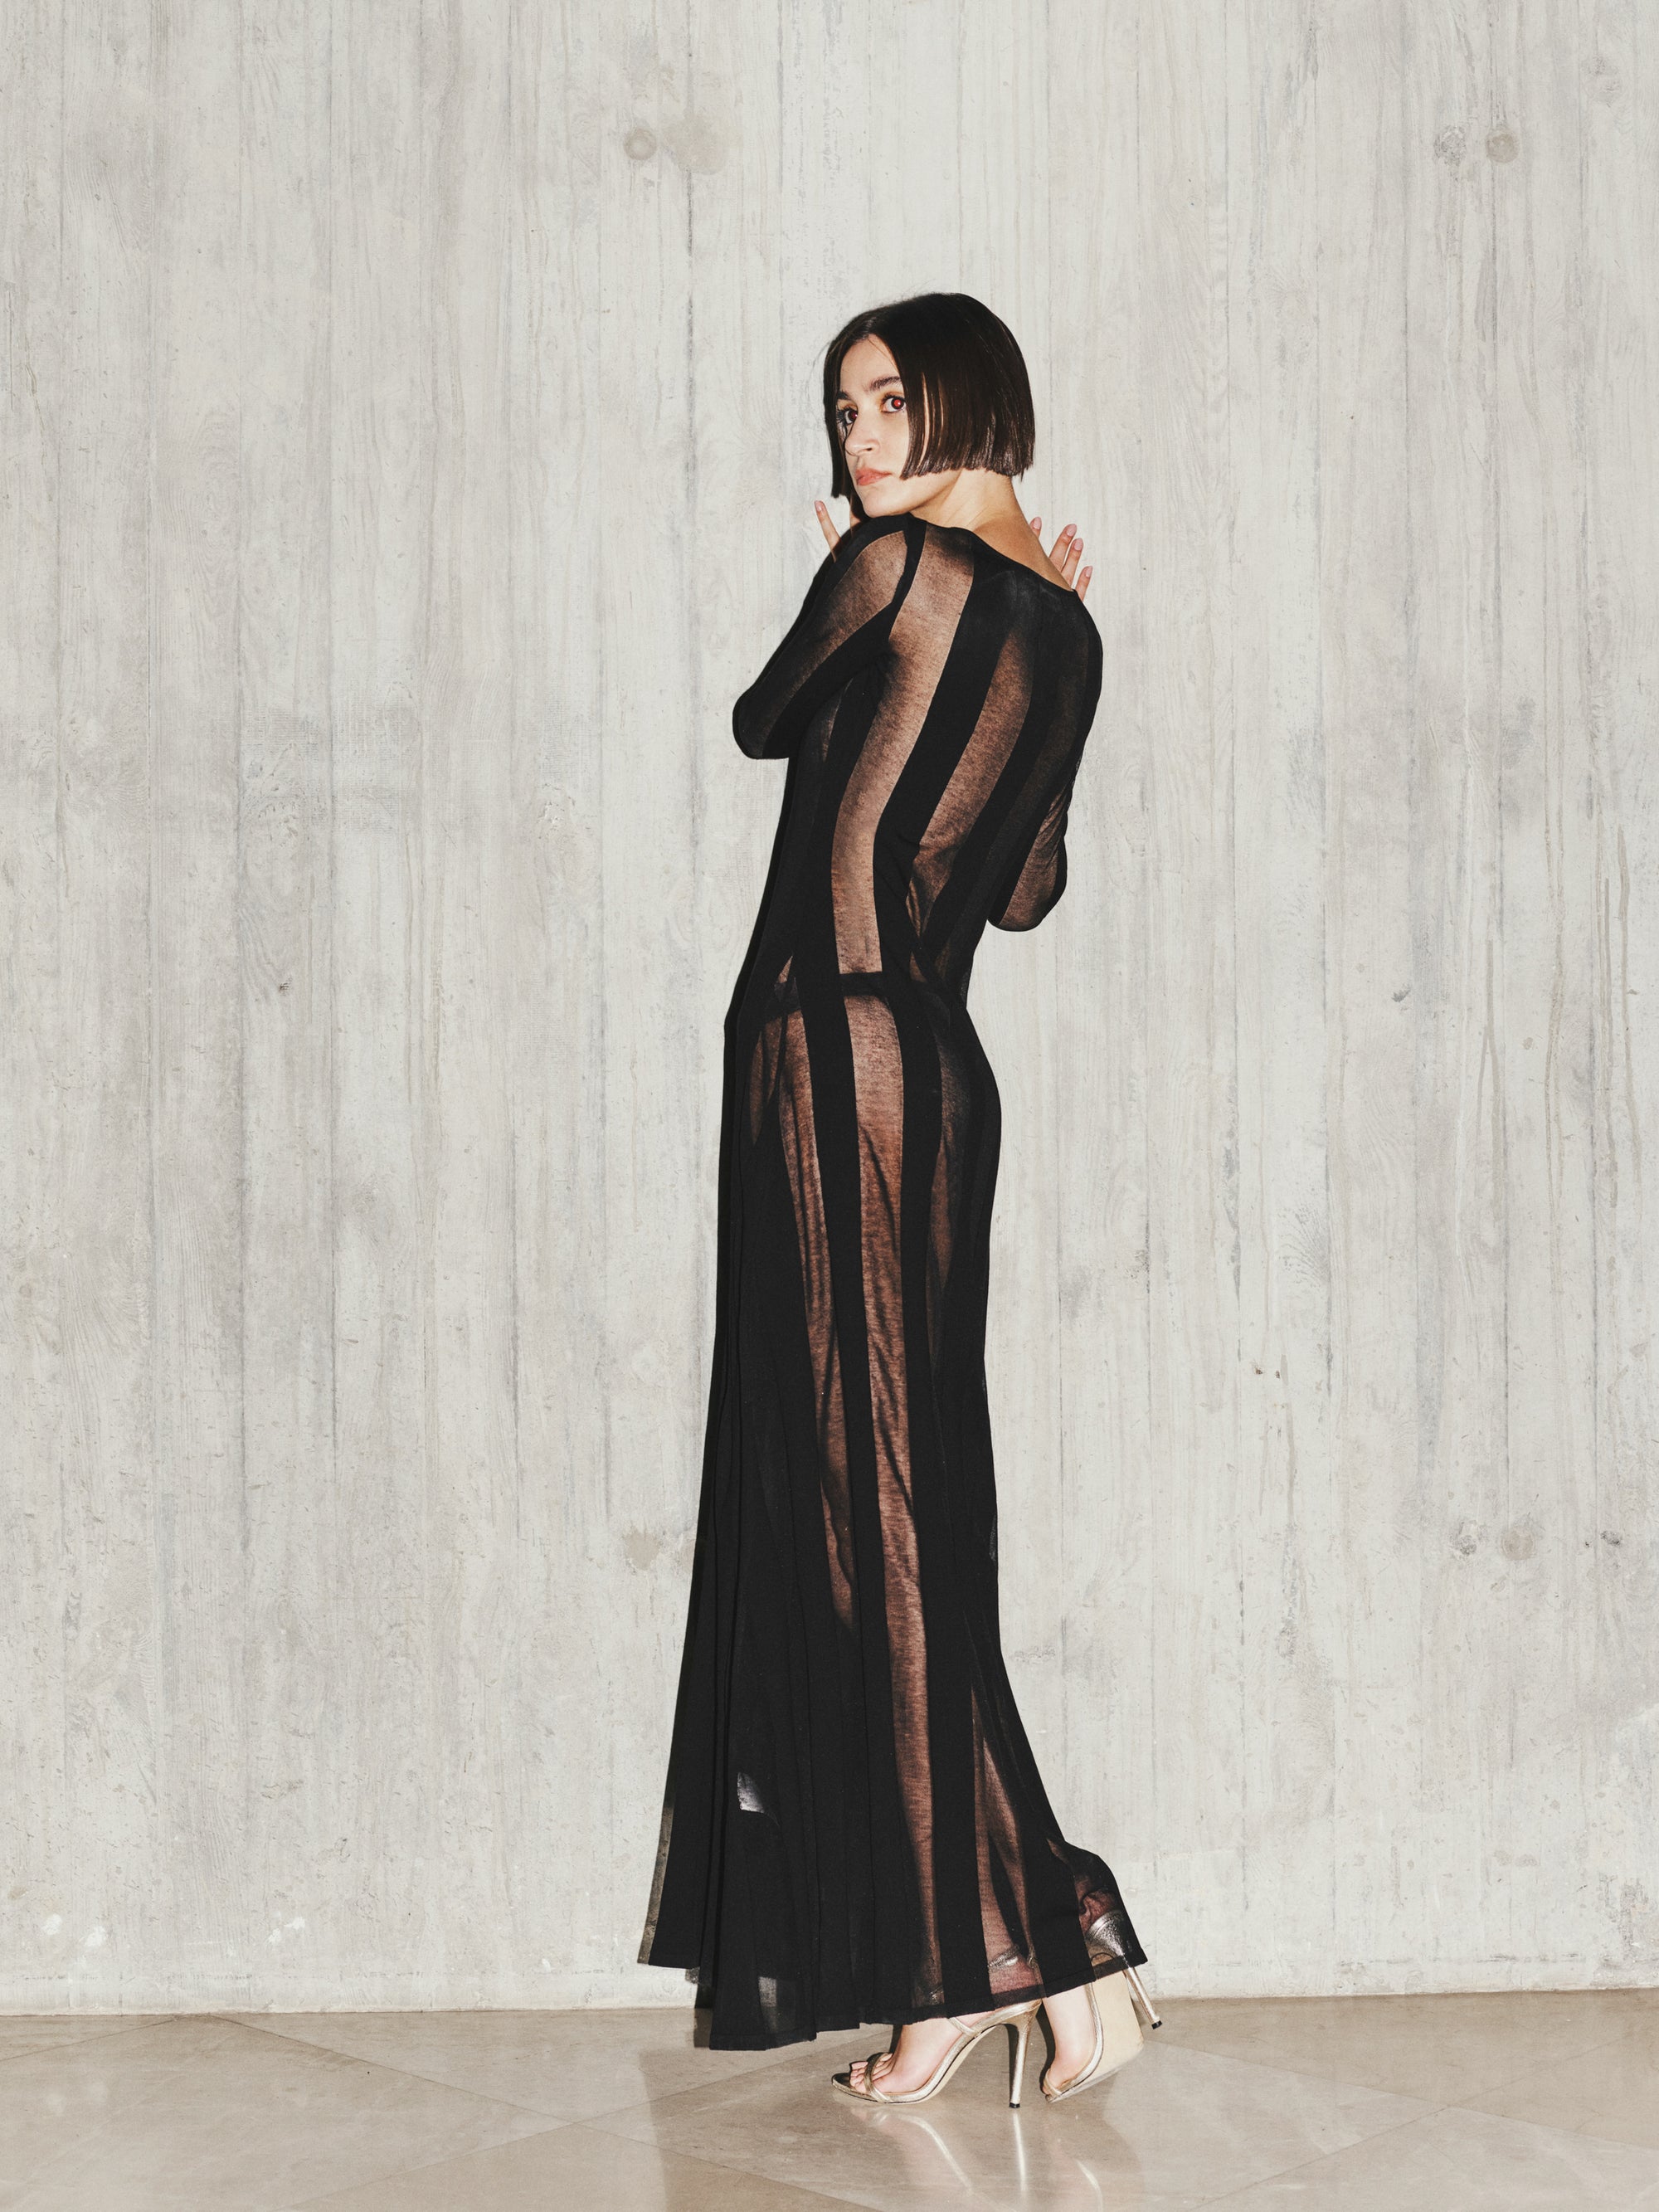 Sheer Knit Gown